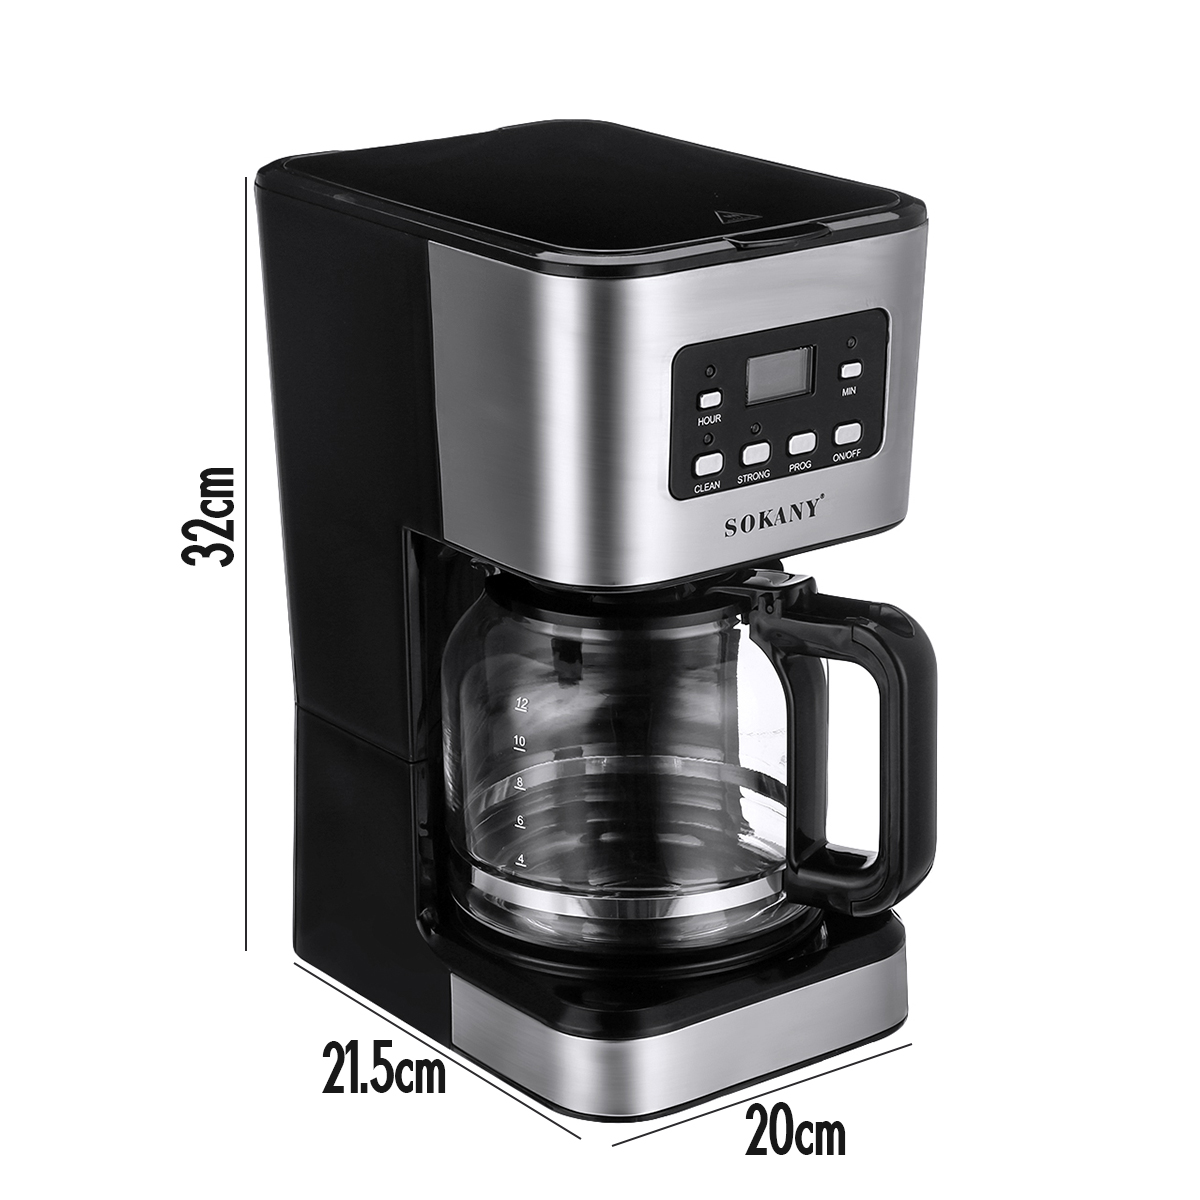 220V Coffee Maker 12 Cups 1.5L Semi-Automatic Espresso Making Machine Stainless Steel 32